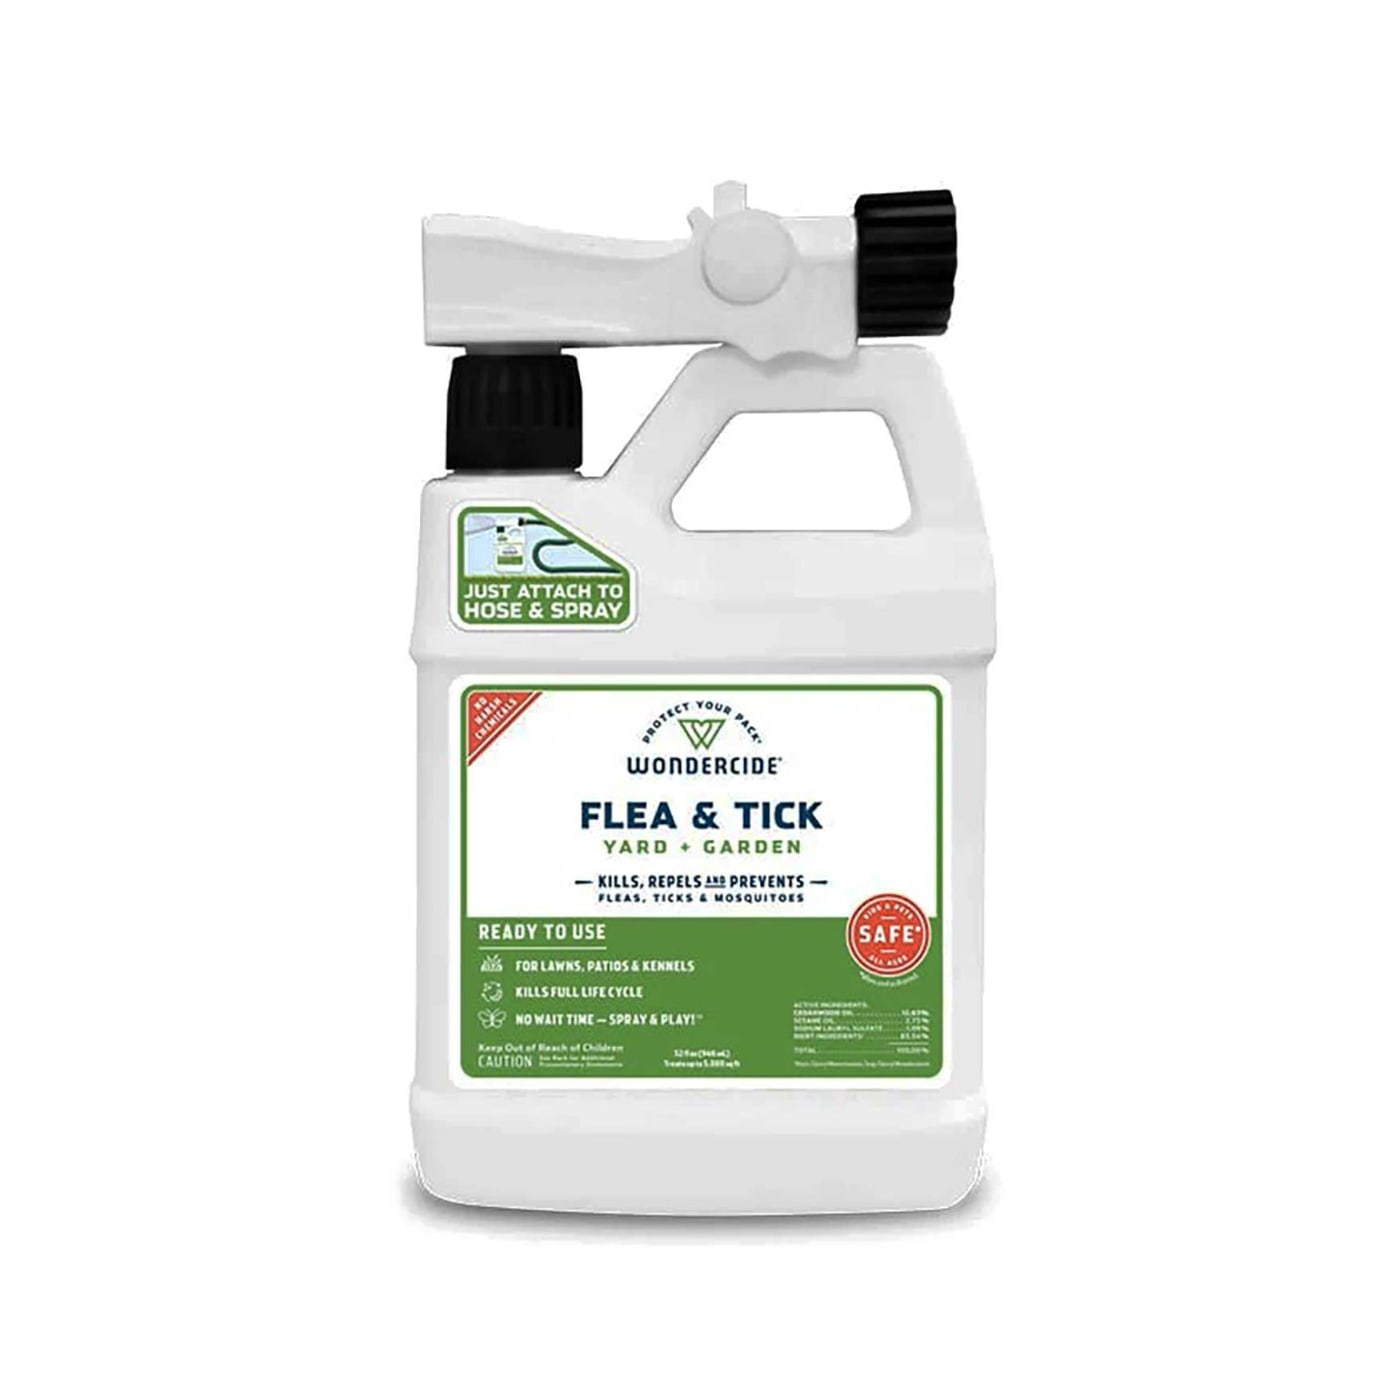 Ready-to-Use Flea & Tick Spray for Yard + Garden with Natural Essential Oils